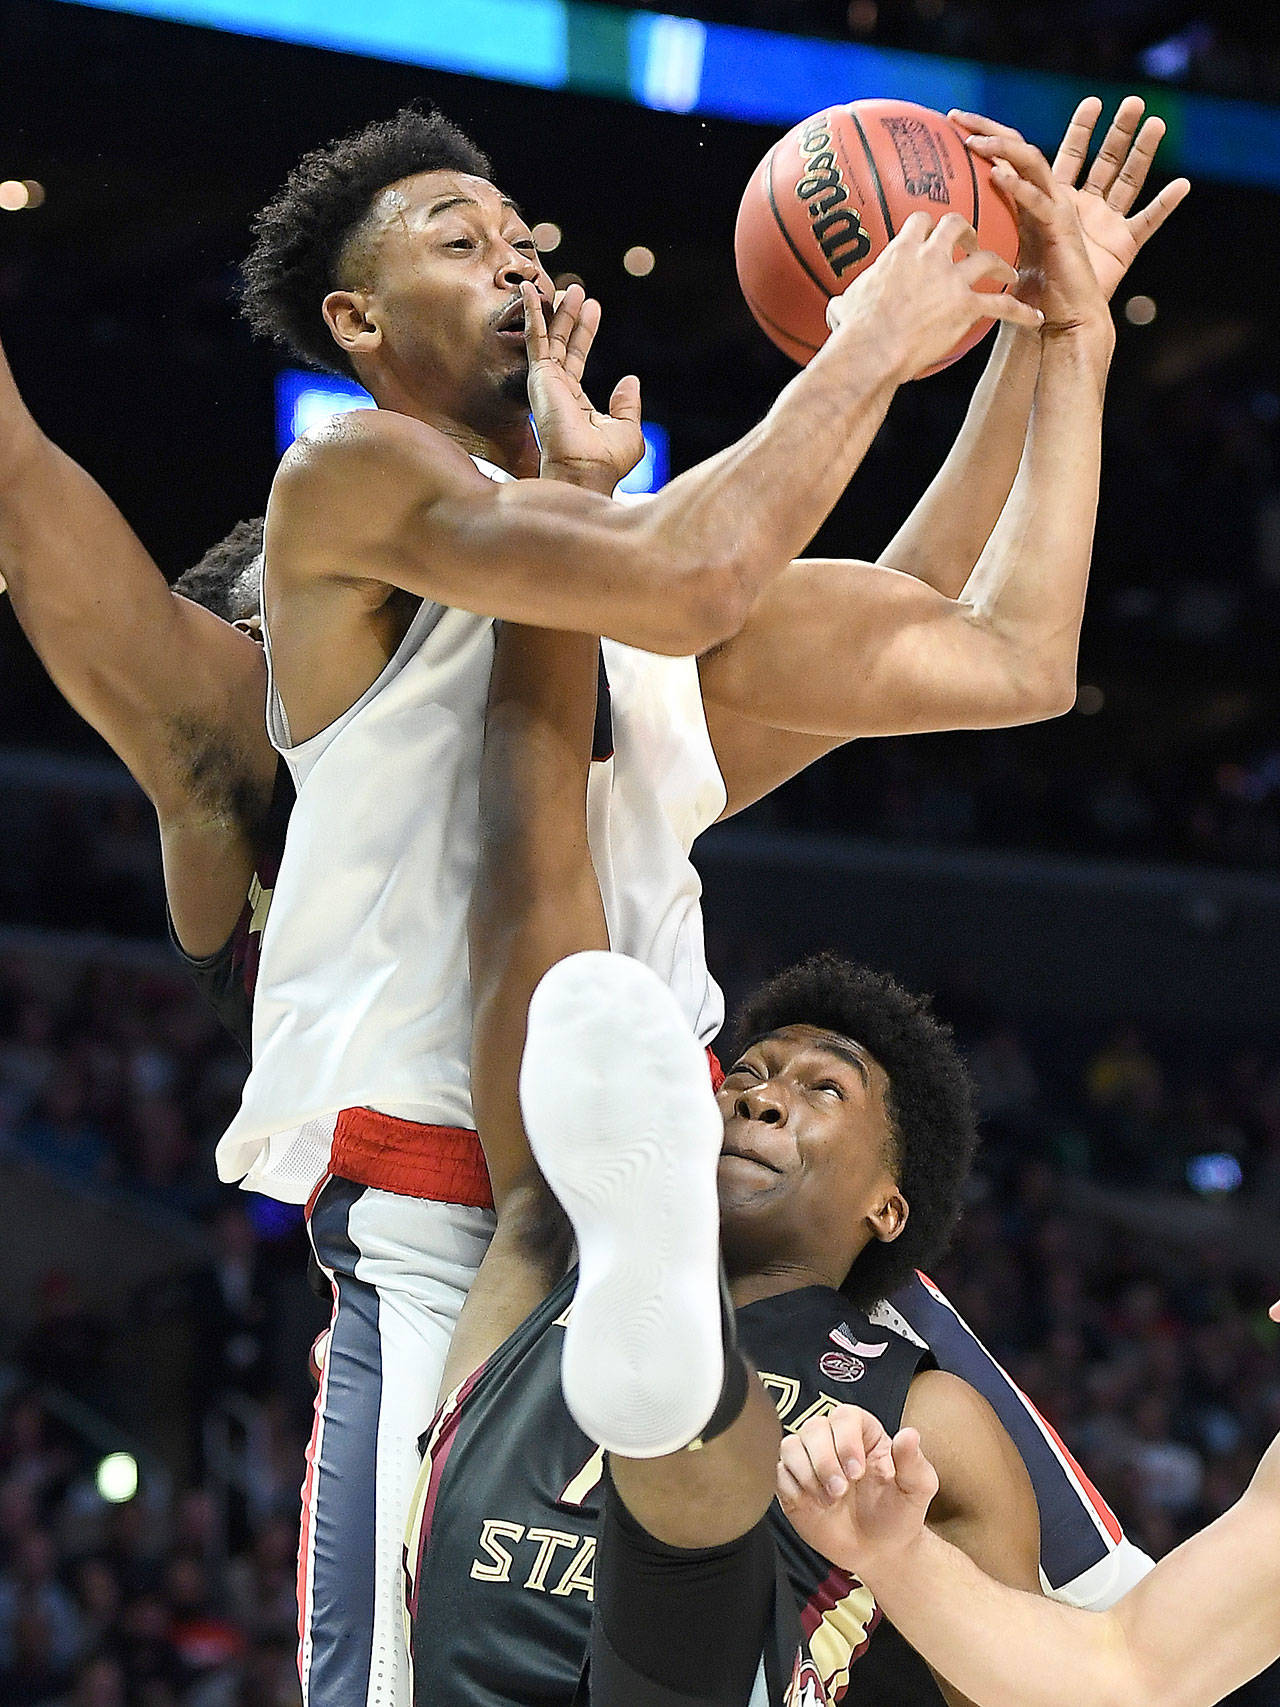 Gonzaga’s Jonathan Williams battles for a rebound with Florida State’s Terance Mann during the second half in an NCAA Tournament regional semifinal at Staple Center in Los Angeles on Thursday, March 22, 2018. (Wally Skalij/Los Angeles Times/TNS)